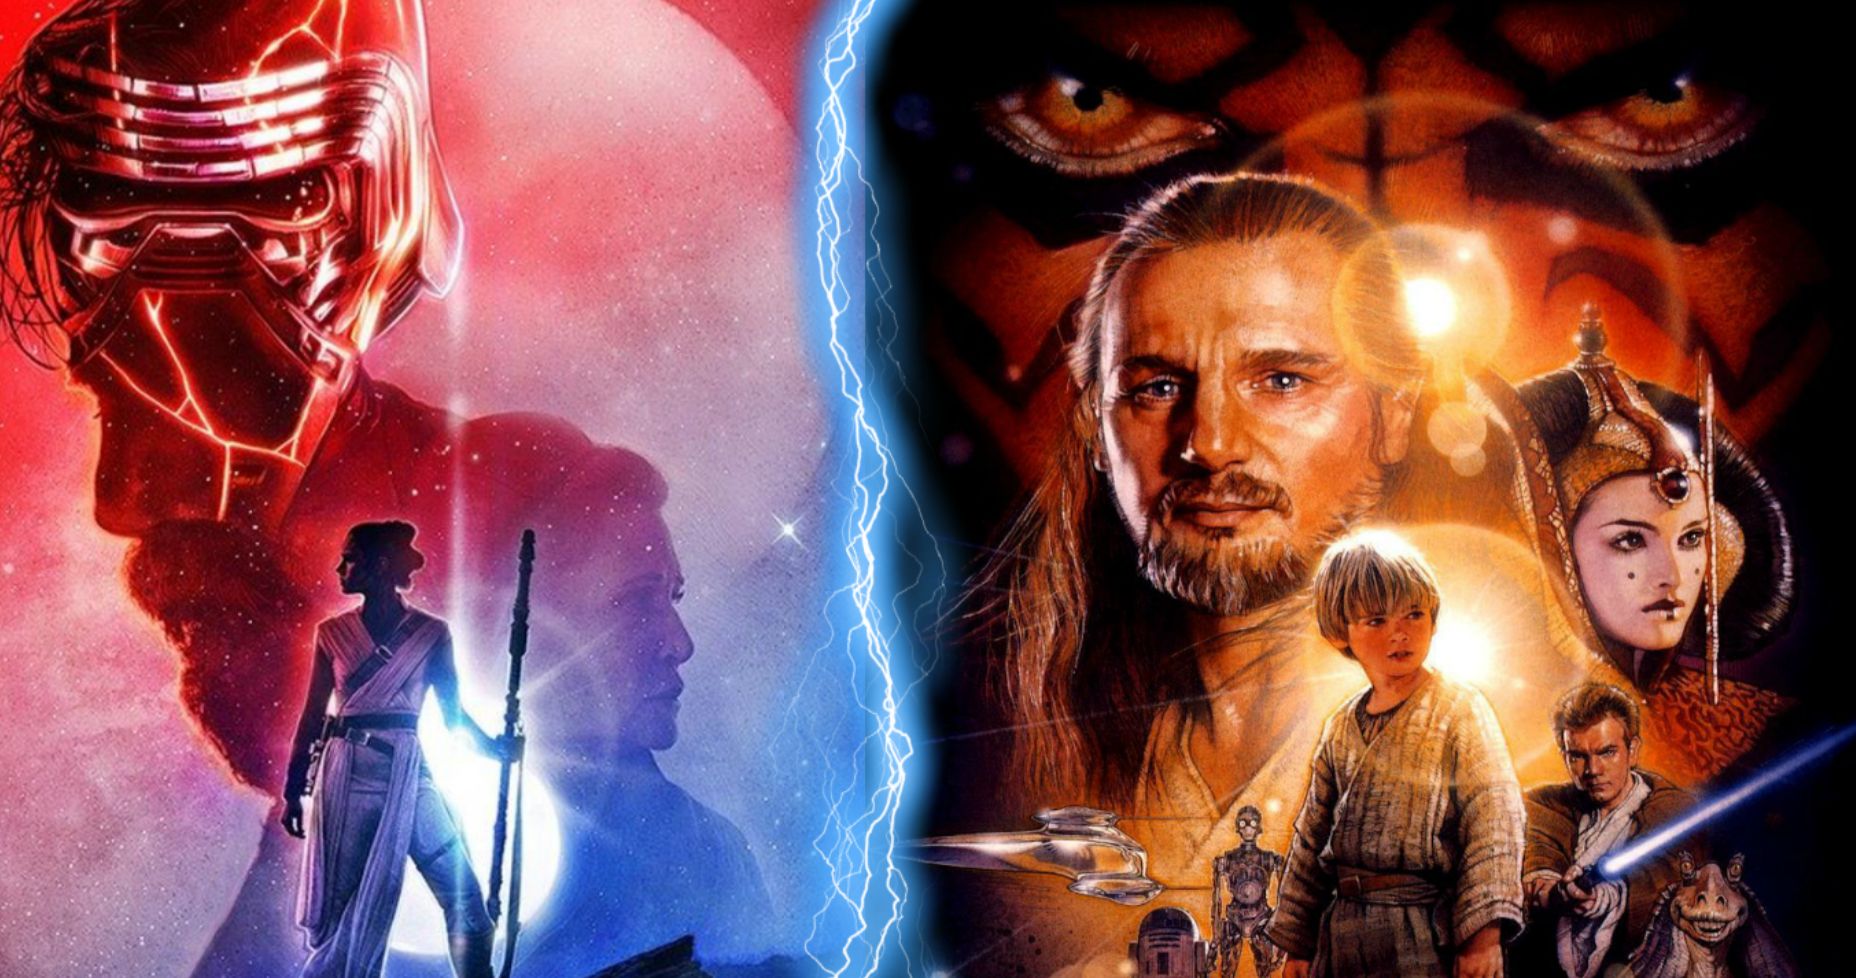 The Rise of Skywalker and The Phantom Menace Tie for Worst Reviewed Star Wars Movie